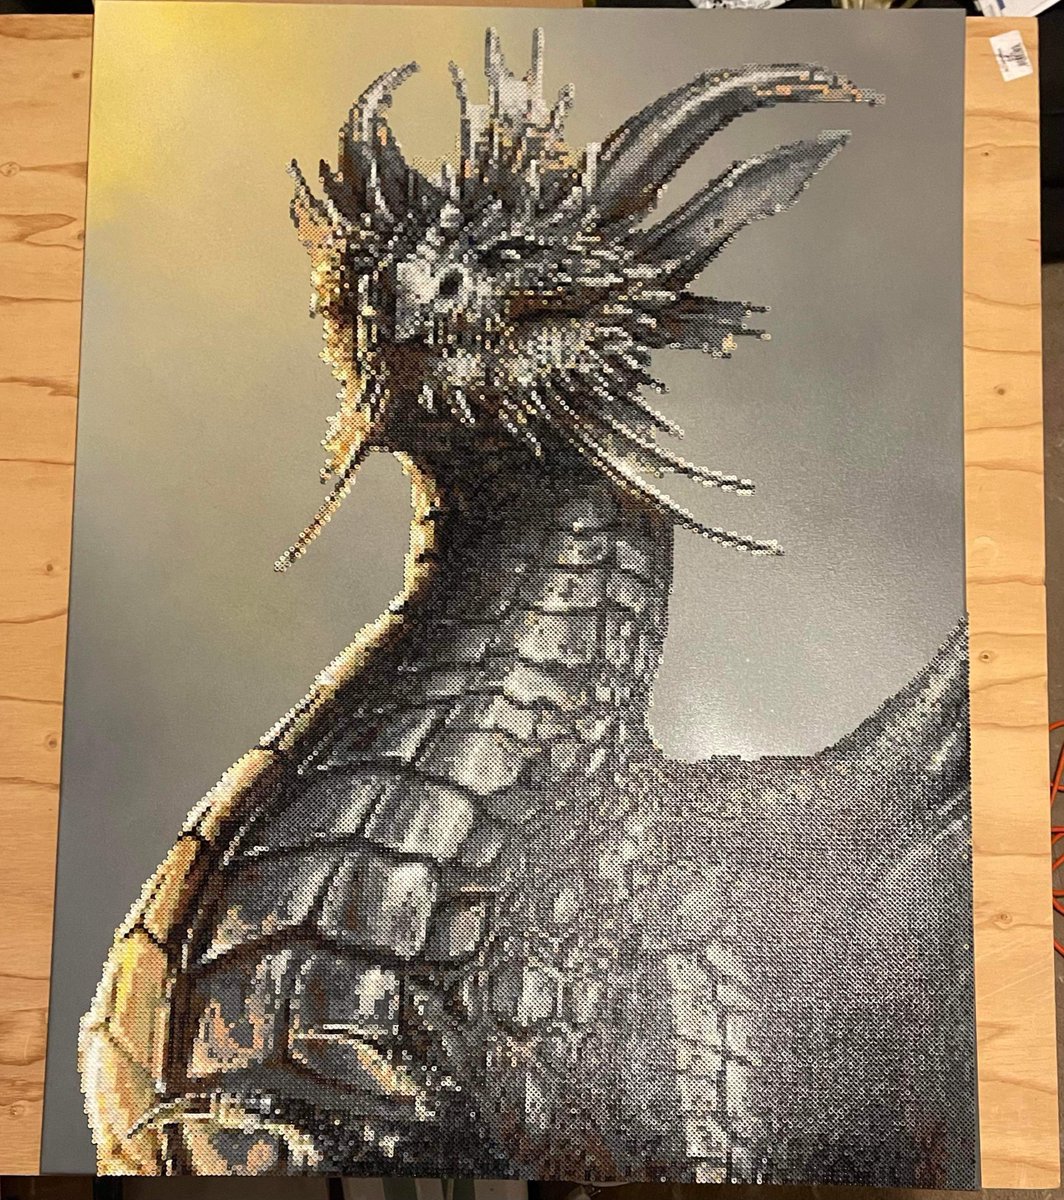 Check out this incredible dragon 🐉 from our customer

🎨Captured in all its glory on a massive 4ft canvas.

#ArtLovers #DragonArt #CanvasMagic #artkal #artkalbeads #artkalmini #perlerbeads #hamabeads #pixelart #fusebeads #8bitart #art #artwork #crafts #artcraft